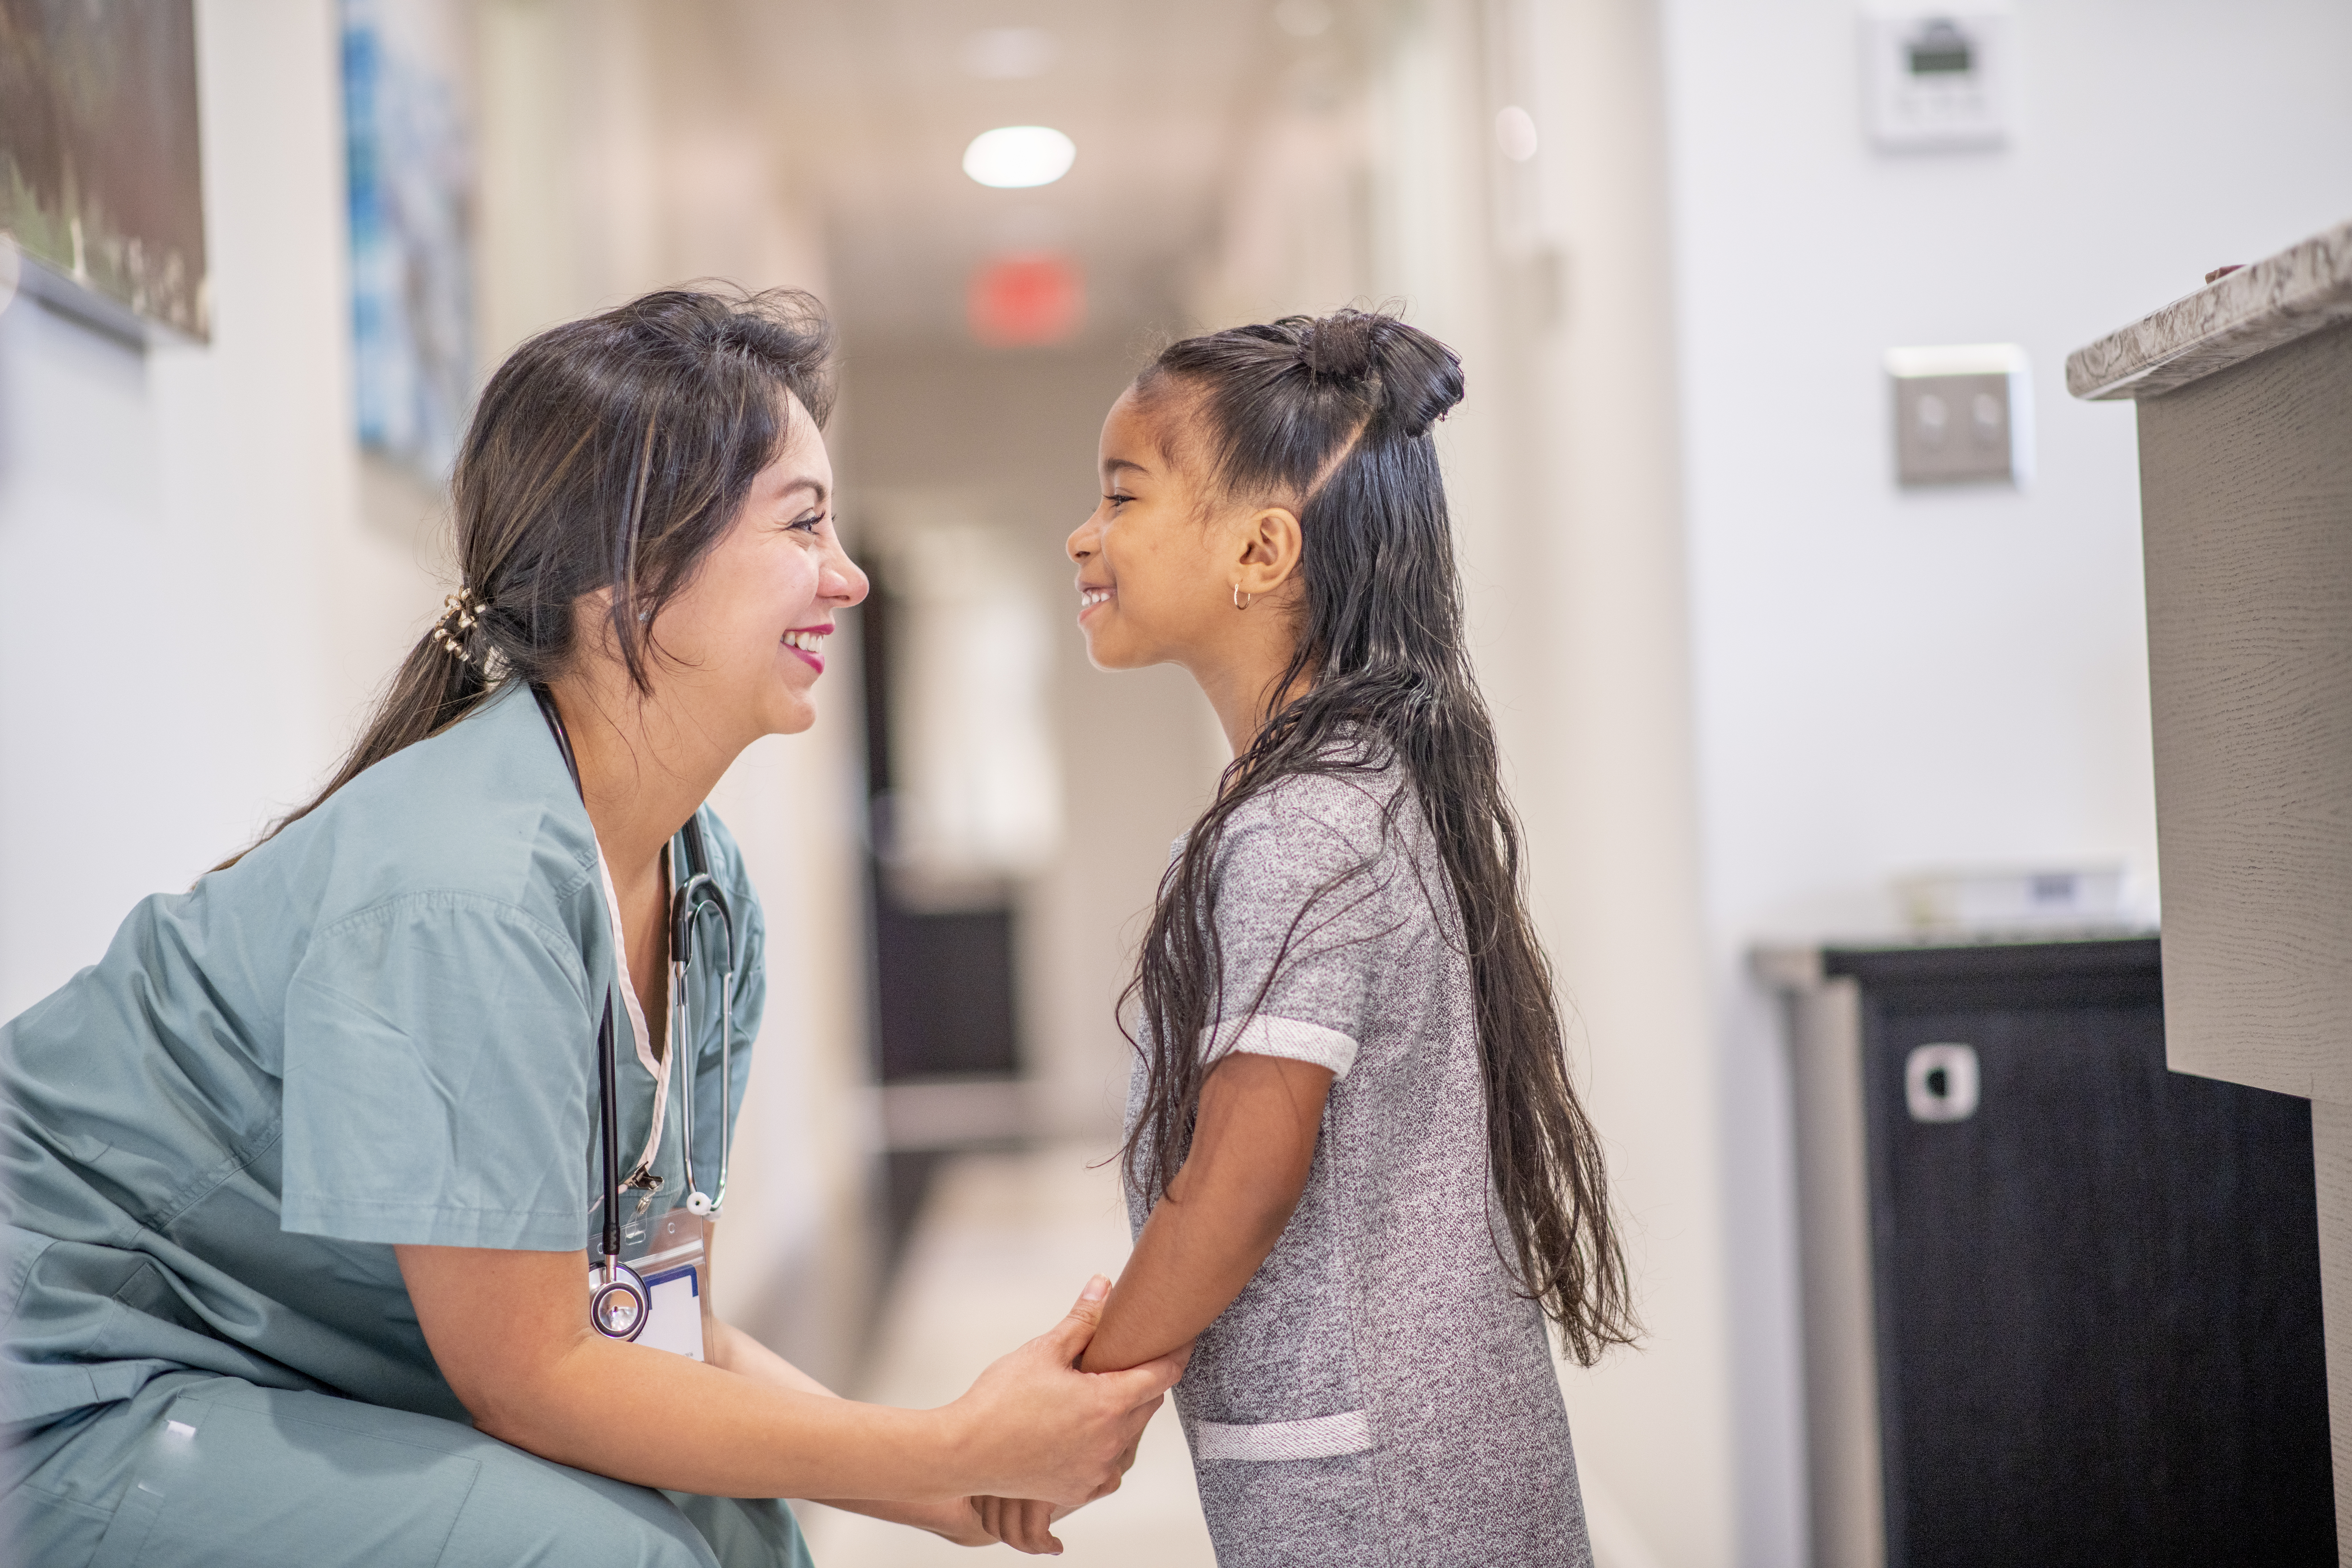 Young girl and nurse smiling at each other in hospital